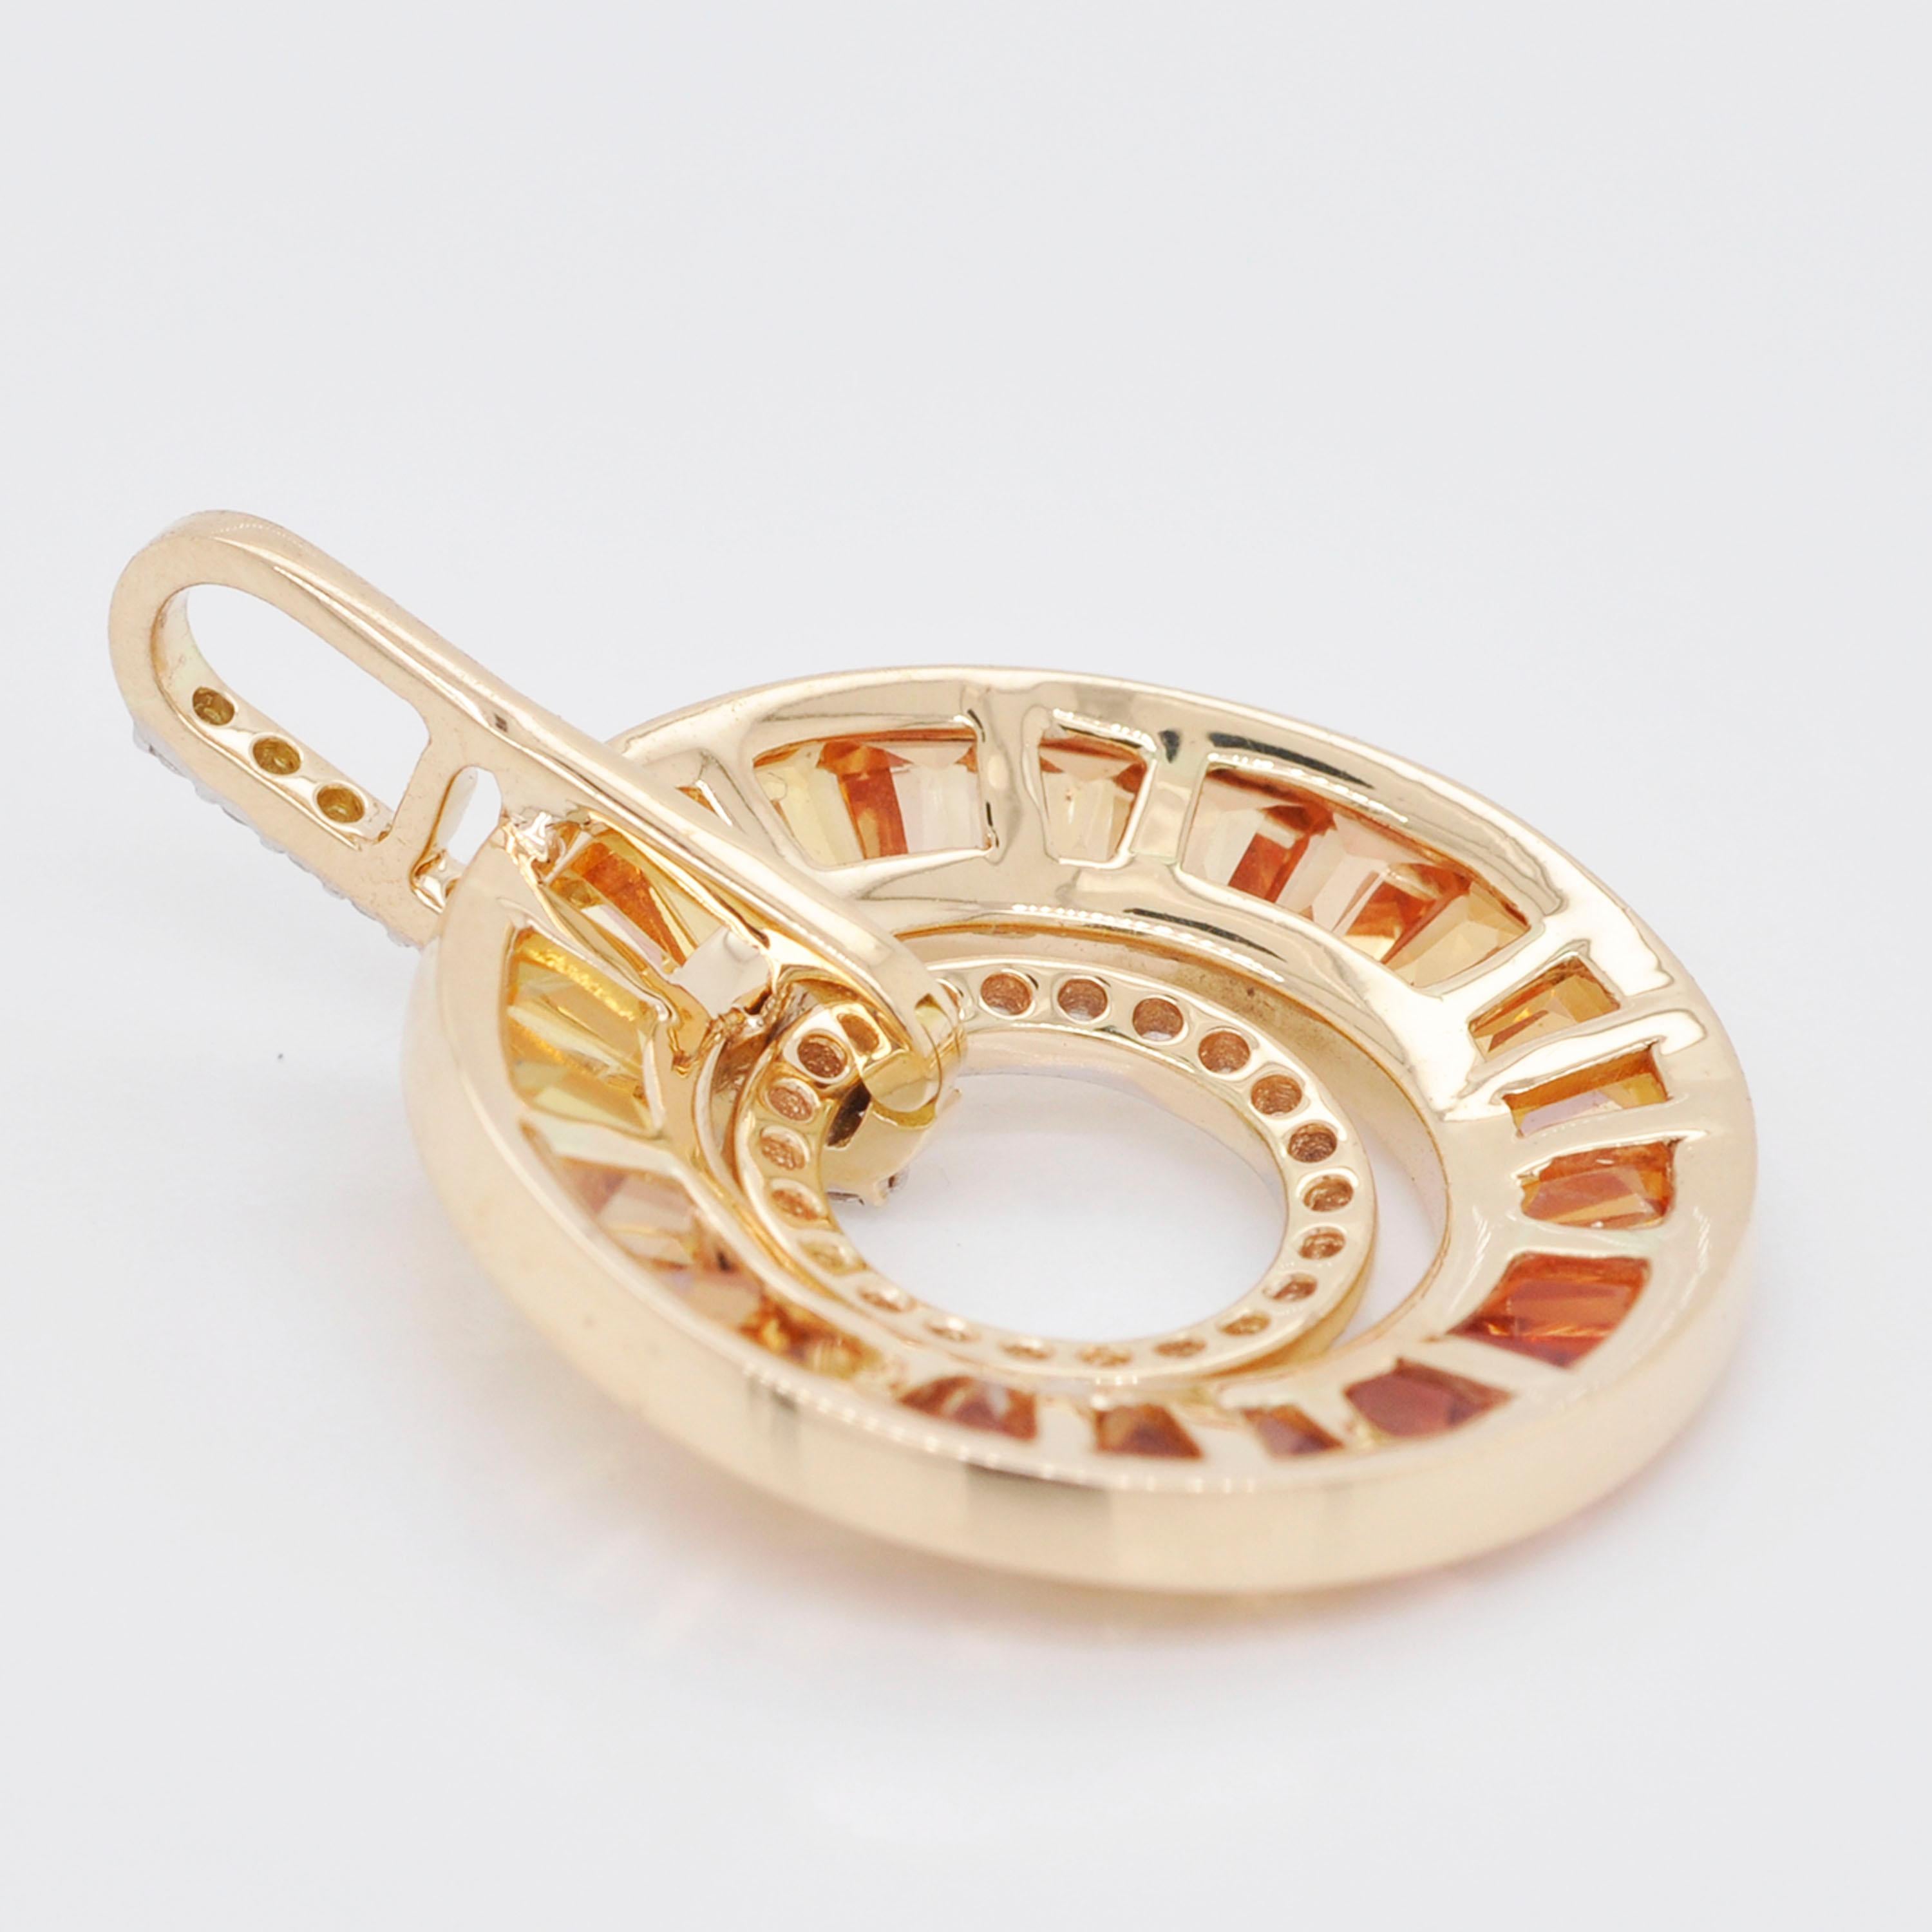 18 karat gold art-deco style yellow sapphire tapered baguettes diamond circular pendant.

This extraordinary art deco style delicate pendant featuring ombré shades of yellow sapphire is encapsulating. Meticulous hand-picked selections of 22 lustrous